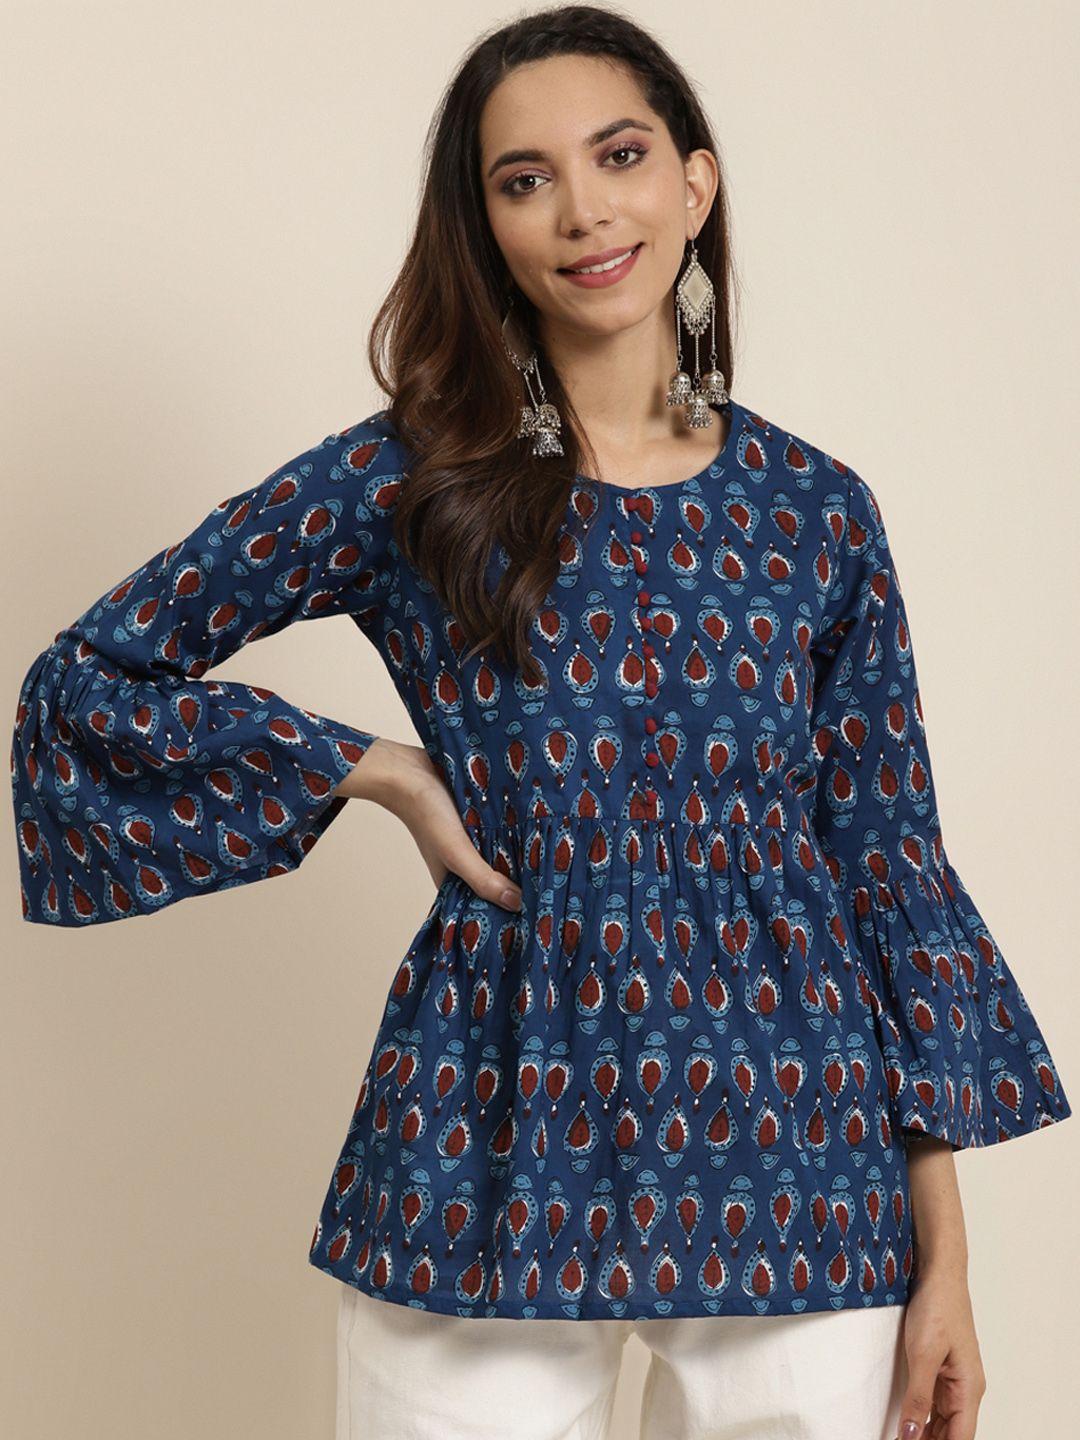 yash gallery navy blue & maroon printed bell sleeves pure cotton a-line fusion top